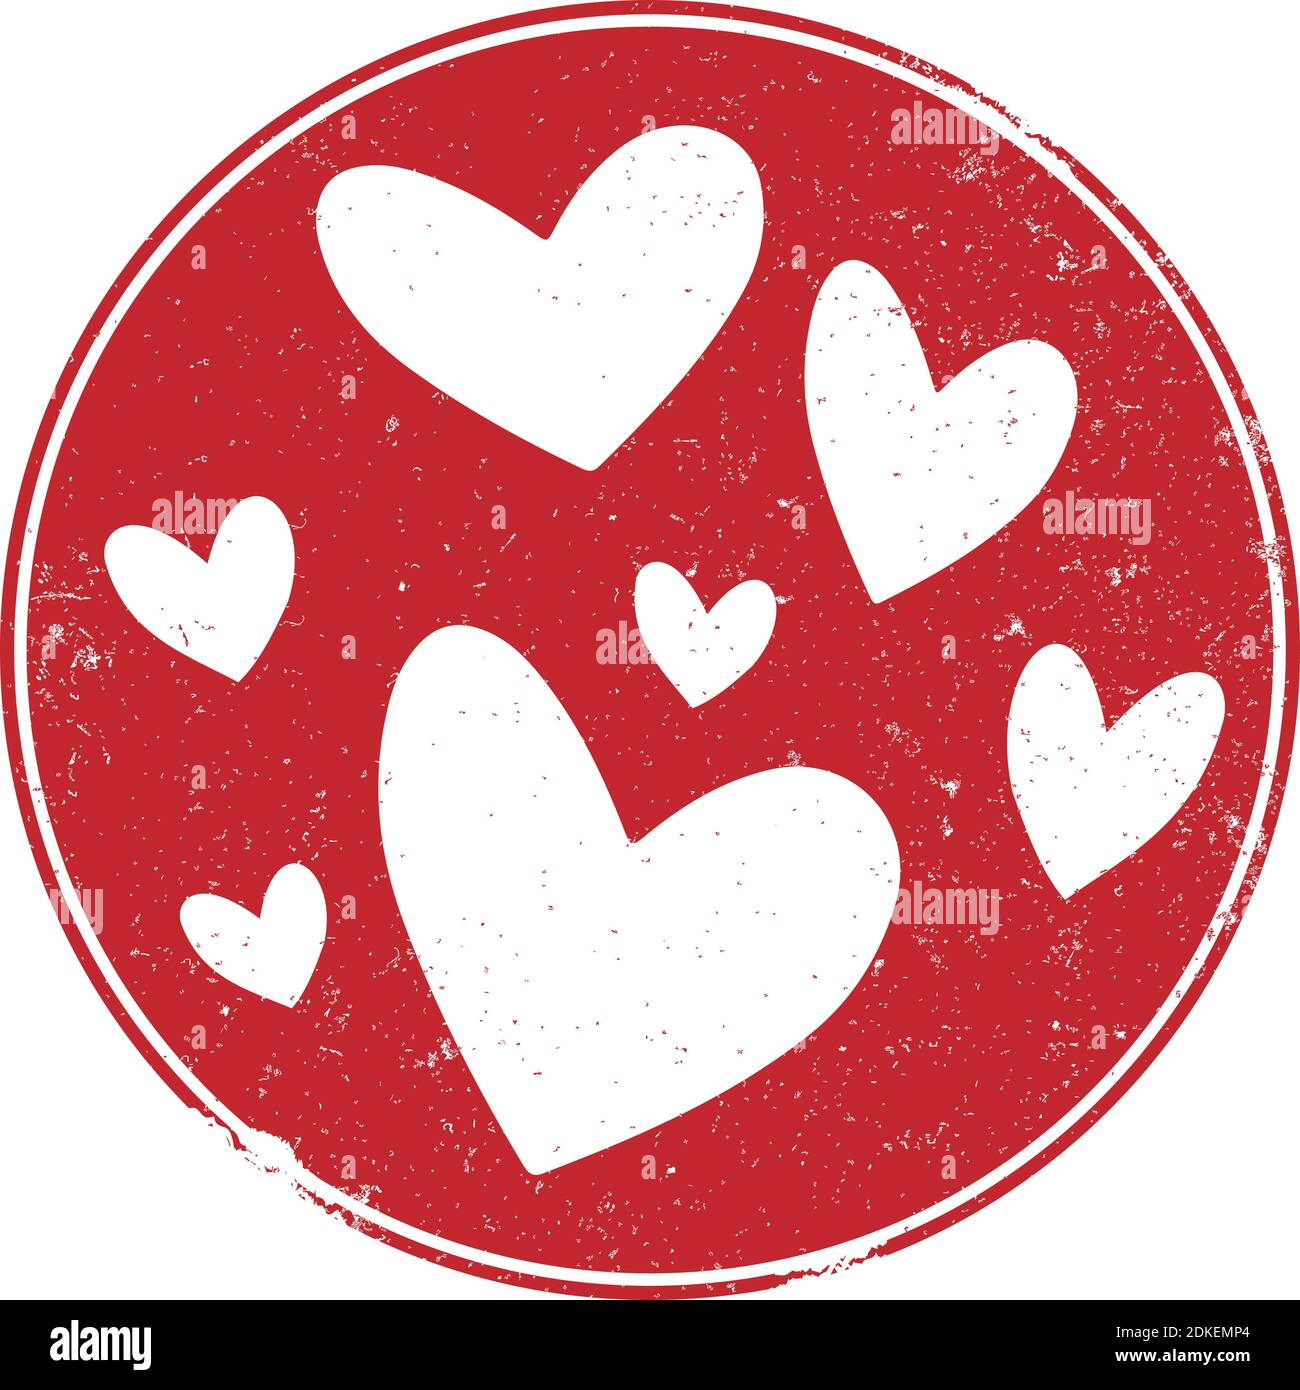 grungy round red rubber stamp with hearts, love and affection symbol vector illustration Stock Vector